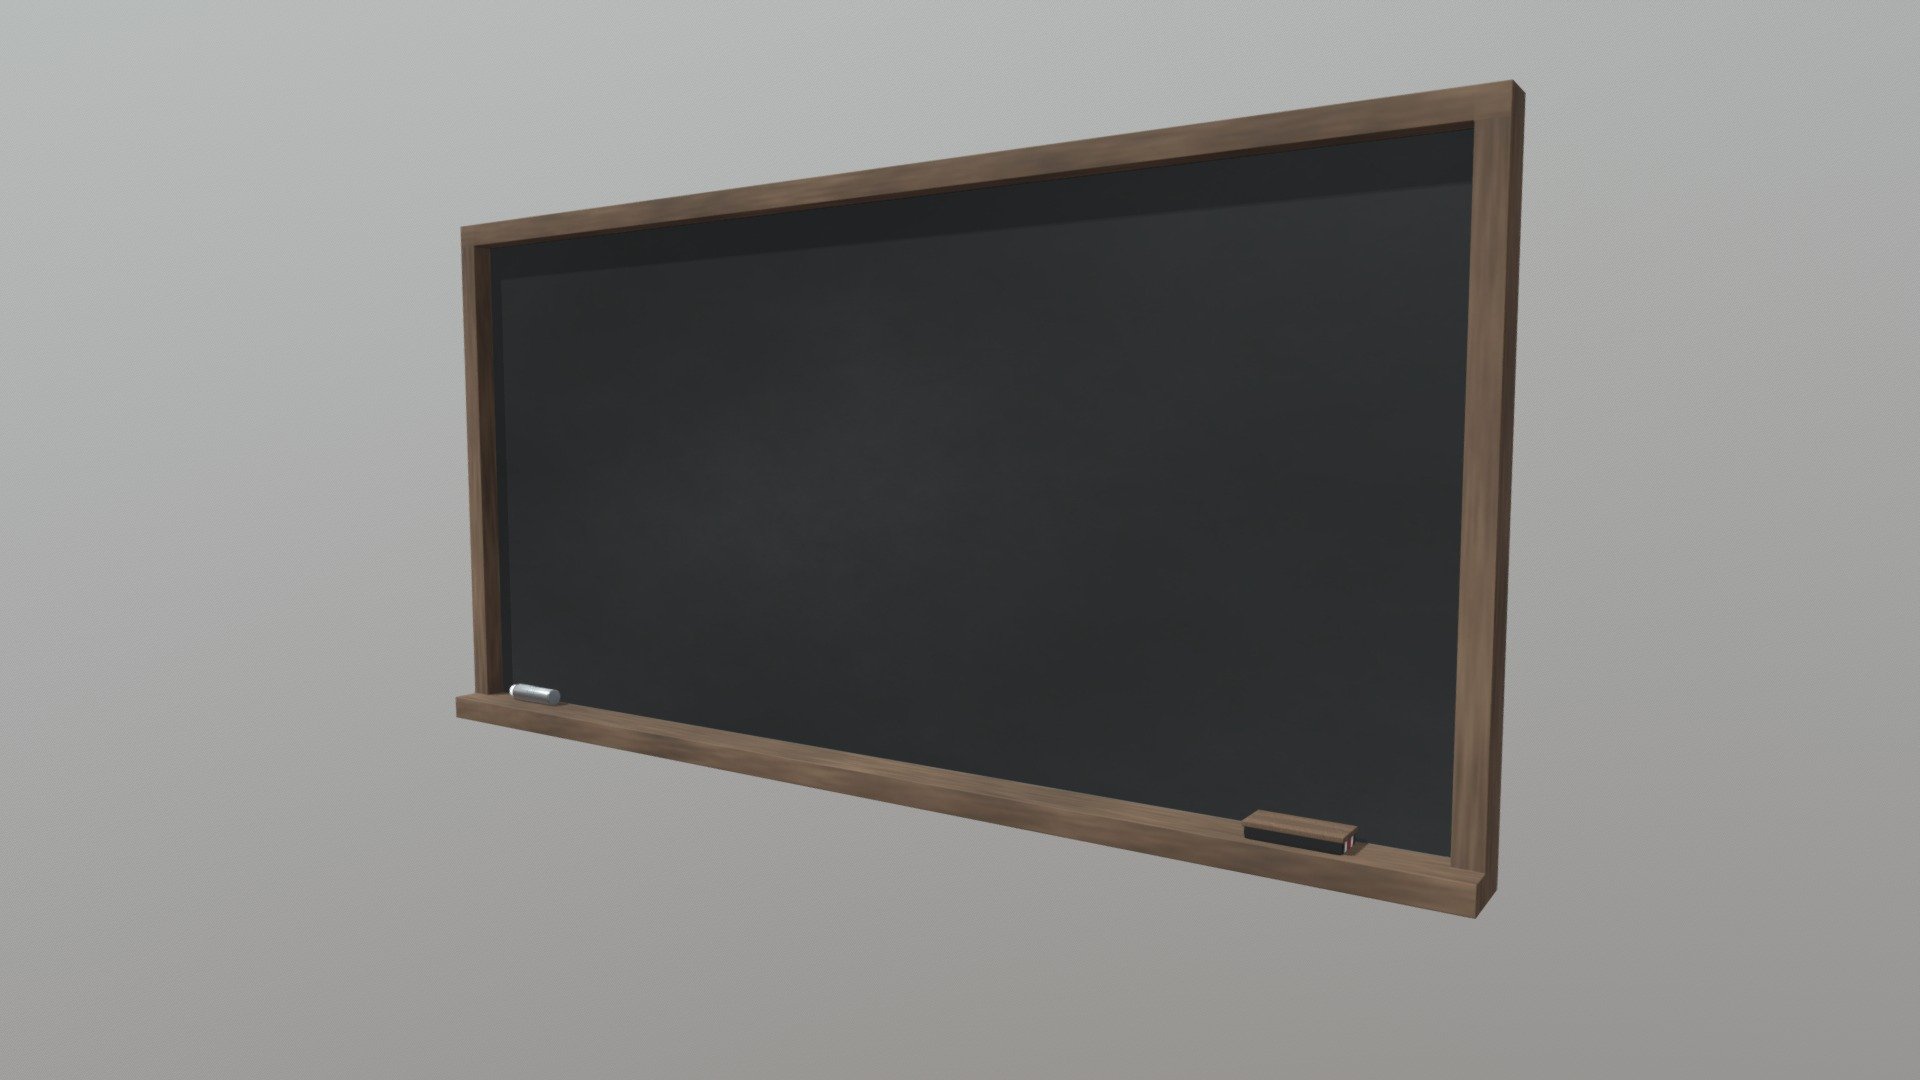 School classroom chalkboard set that was created using Blender. This chalkboard comes with 2 other models, chalk inside a chalk holder and a chalk brush. All models use the metalness  workflow and are PBR ready. It also has been exported in 4 file formats (FBX, OBJ, 3DS, DAE/Collada).This model can be found as part of my “School Classroom Asset Pack”.

Features:




Uses metalness workflow

Includes two variations of chalkboard diffuse map (dirty &amp; clean)

Textures can be edited in any photo editing software

Includes 17 PBR textures 2048x2048 in PNG format

Overlapping UVMap for duplicate parts of the mesh to save texture space

Models are exported in 4 file formats (FBX, OBJ, 3DS, DAE/Collada)

Part of “School Classroom Asset Pack”

Included Textures:




Diffuse, AO, Roughness, Gloss, Metallic

UVLayout

The source file that is uploaded is for demonstration use and is uploaded in FBX format. In the additional file you will find all model exports and the textures that go along with them 3d model